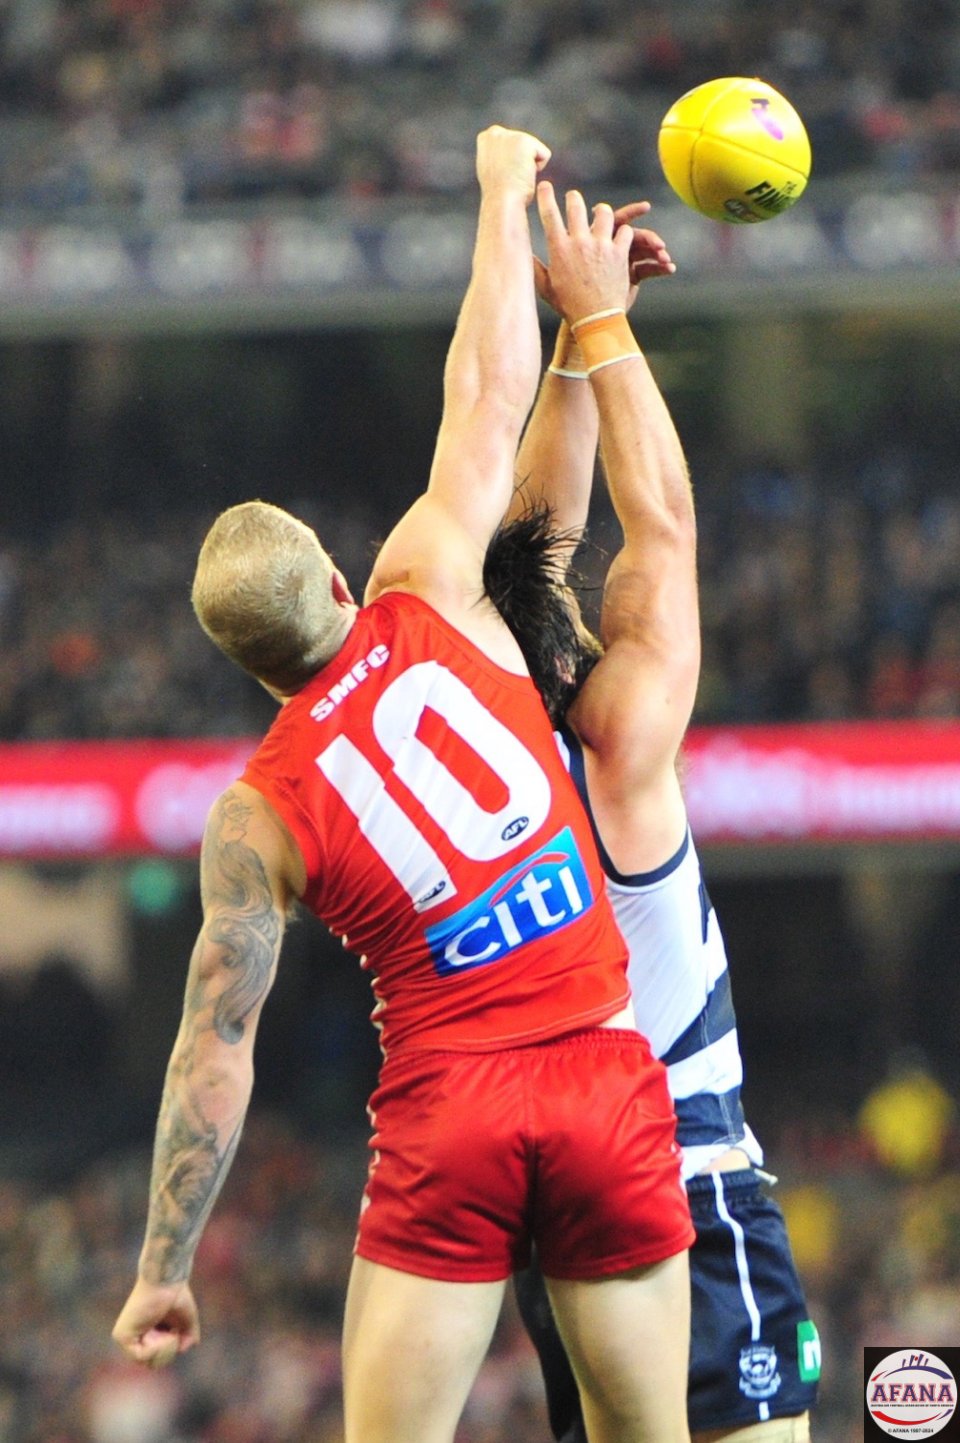 Smith and Bartel conttest the ball